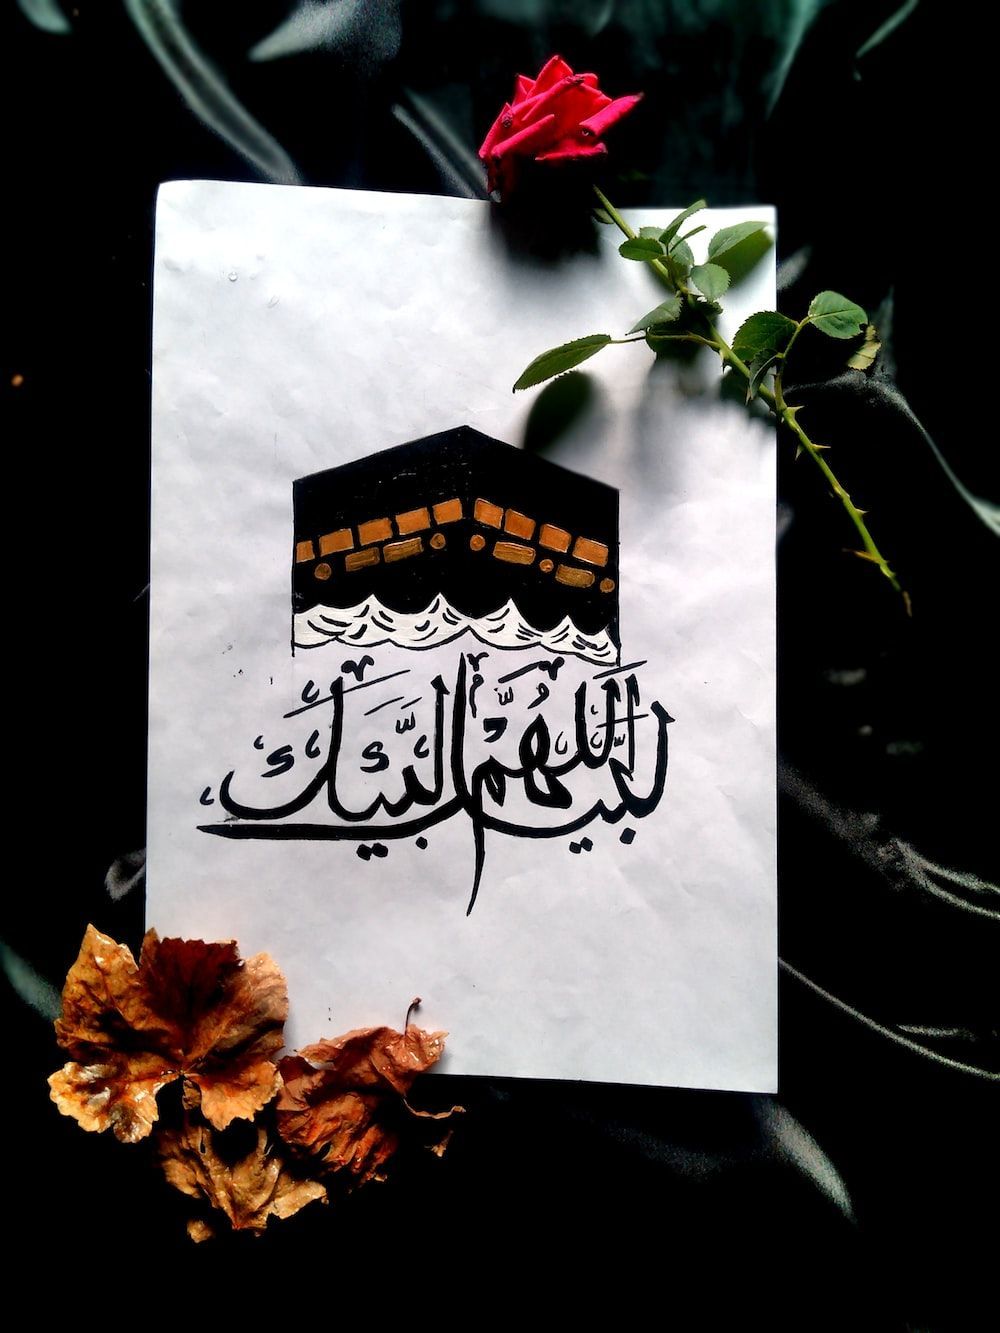 Arabic Calligraphy Picture. Download Free Image